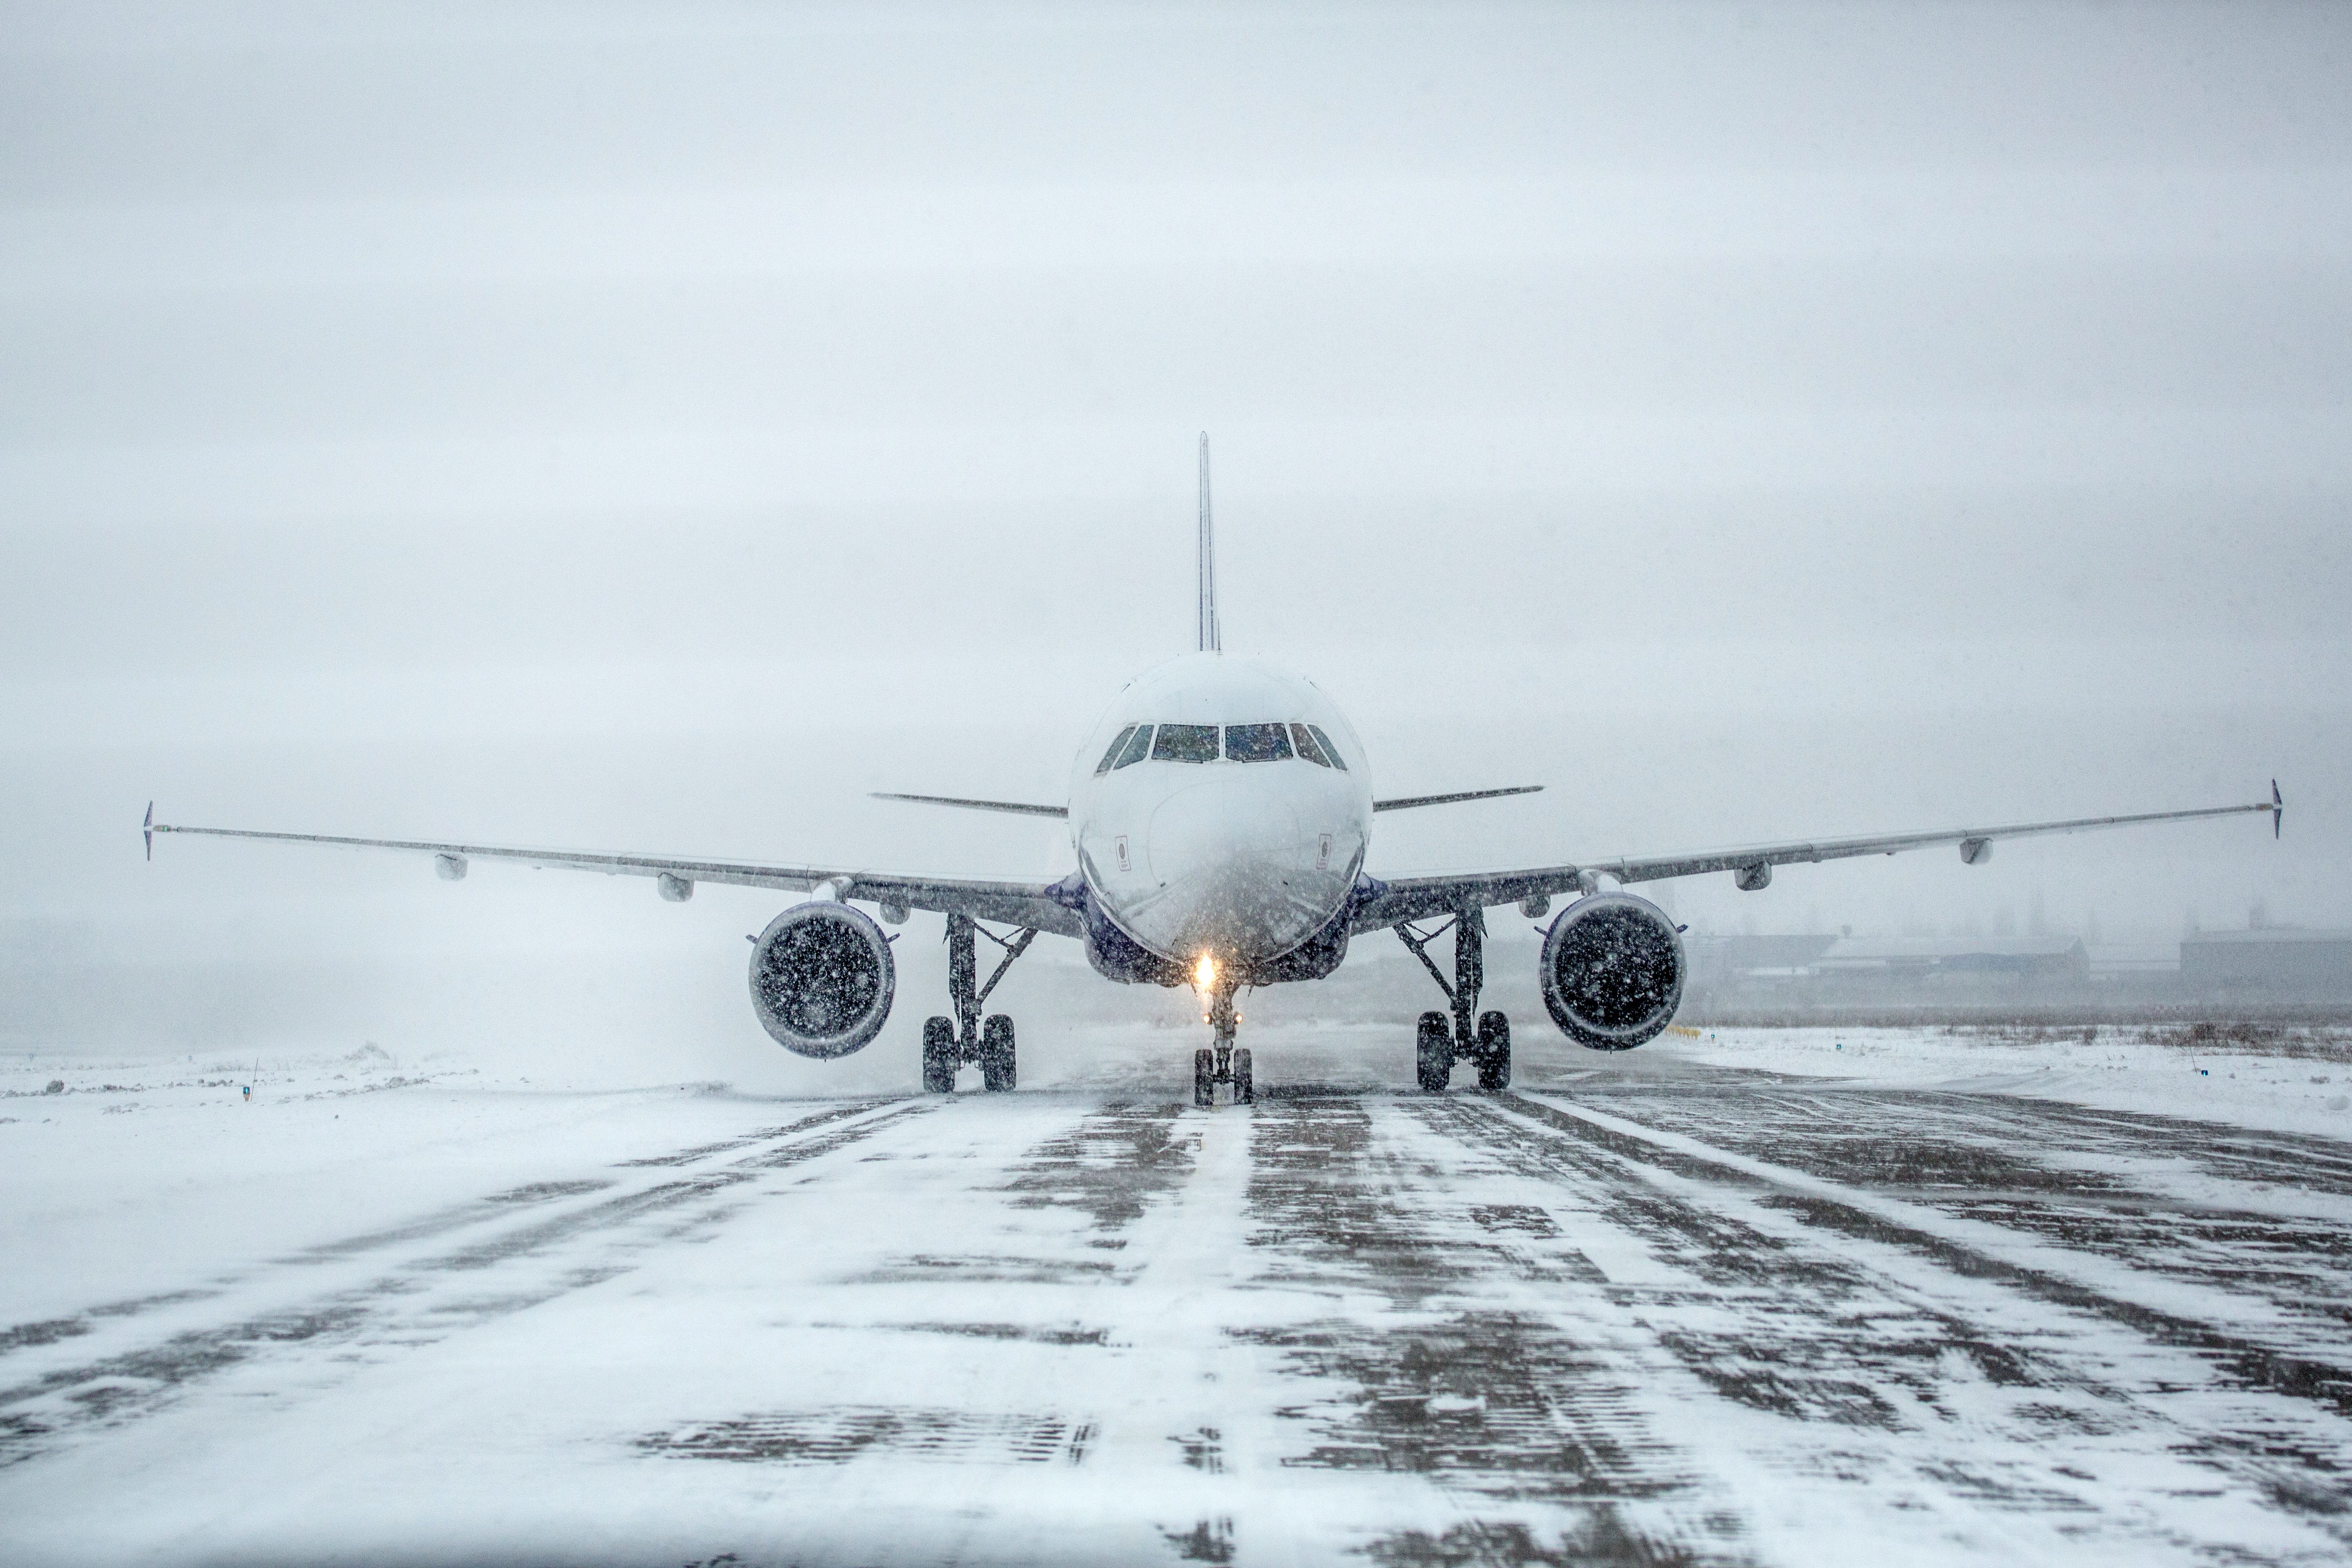 An Airbus aircraft taxiing in the snow